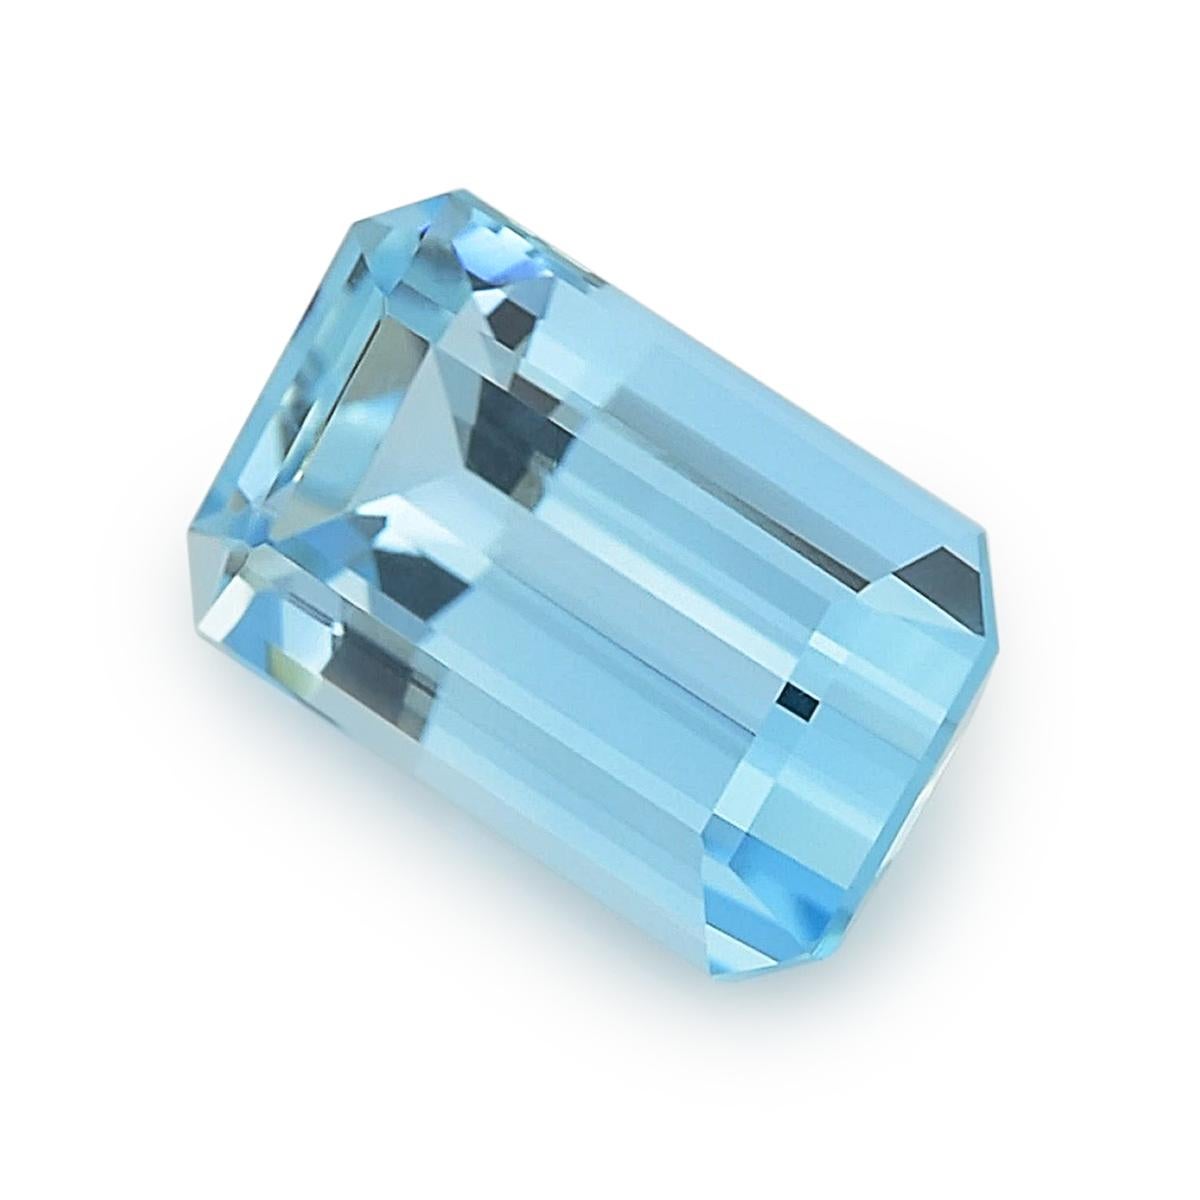 Identification: Natural Aquamarine 2.94 carats

Carat: 2.94 carats
Shape: Emerald cut
Measurements: 11.44 x 6.96 x 5.00 mm 
Cut: Brilliant/Step
Color: Light Blue
Clarity: very eye clean

Presenting a Natural Aquamarine of exquisite beauty, weighing